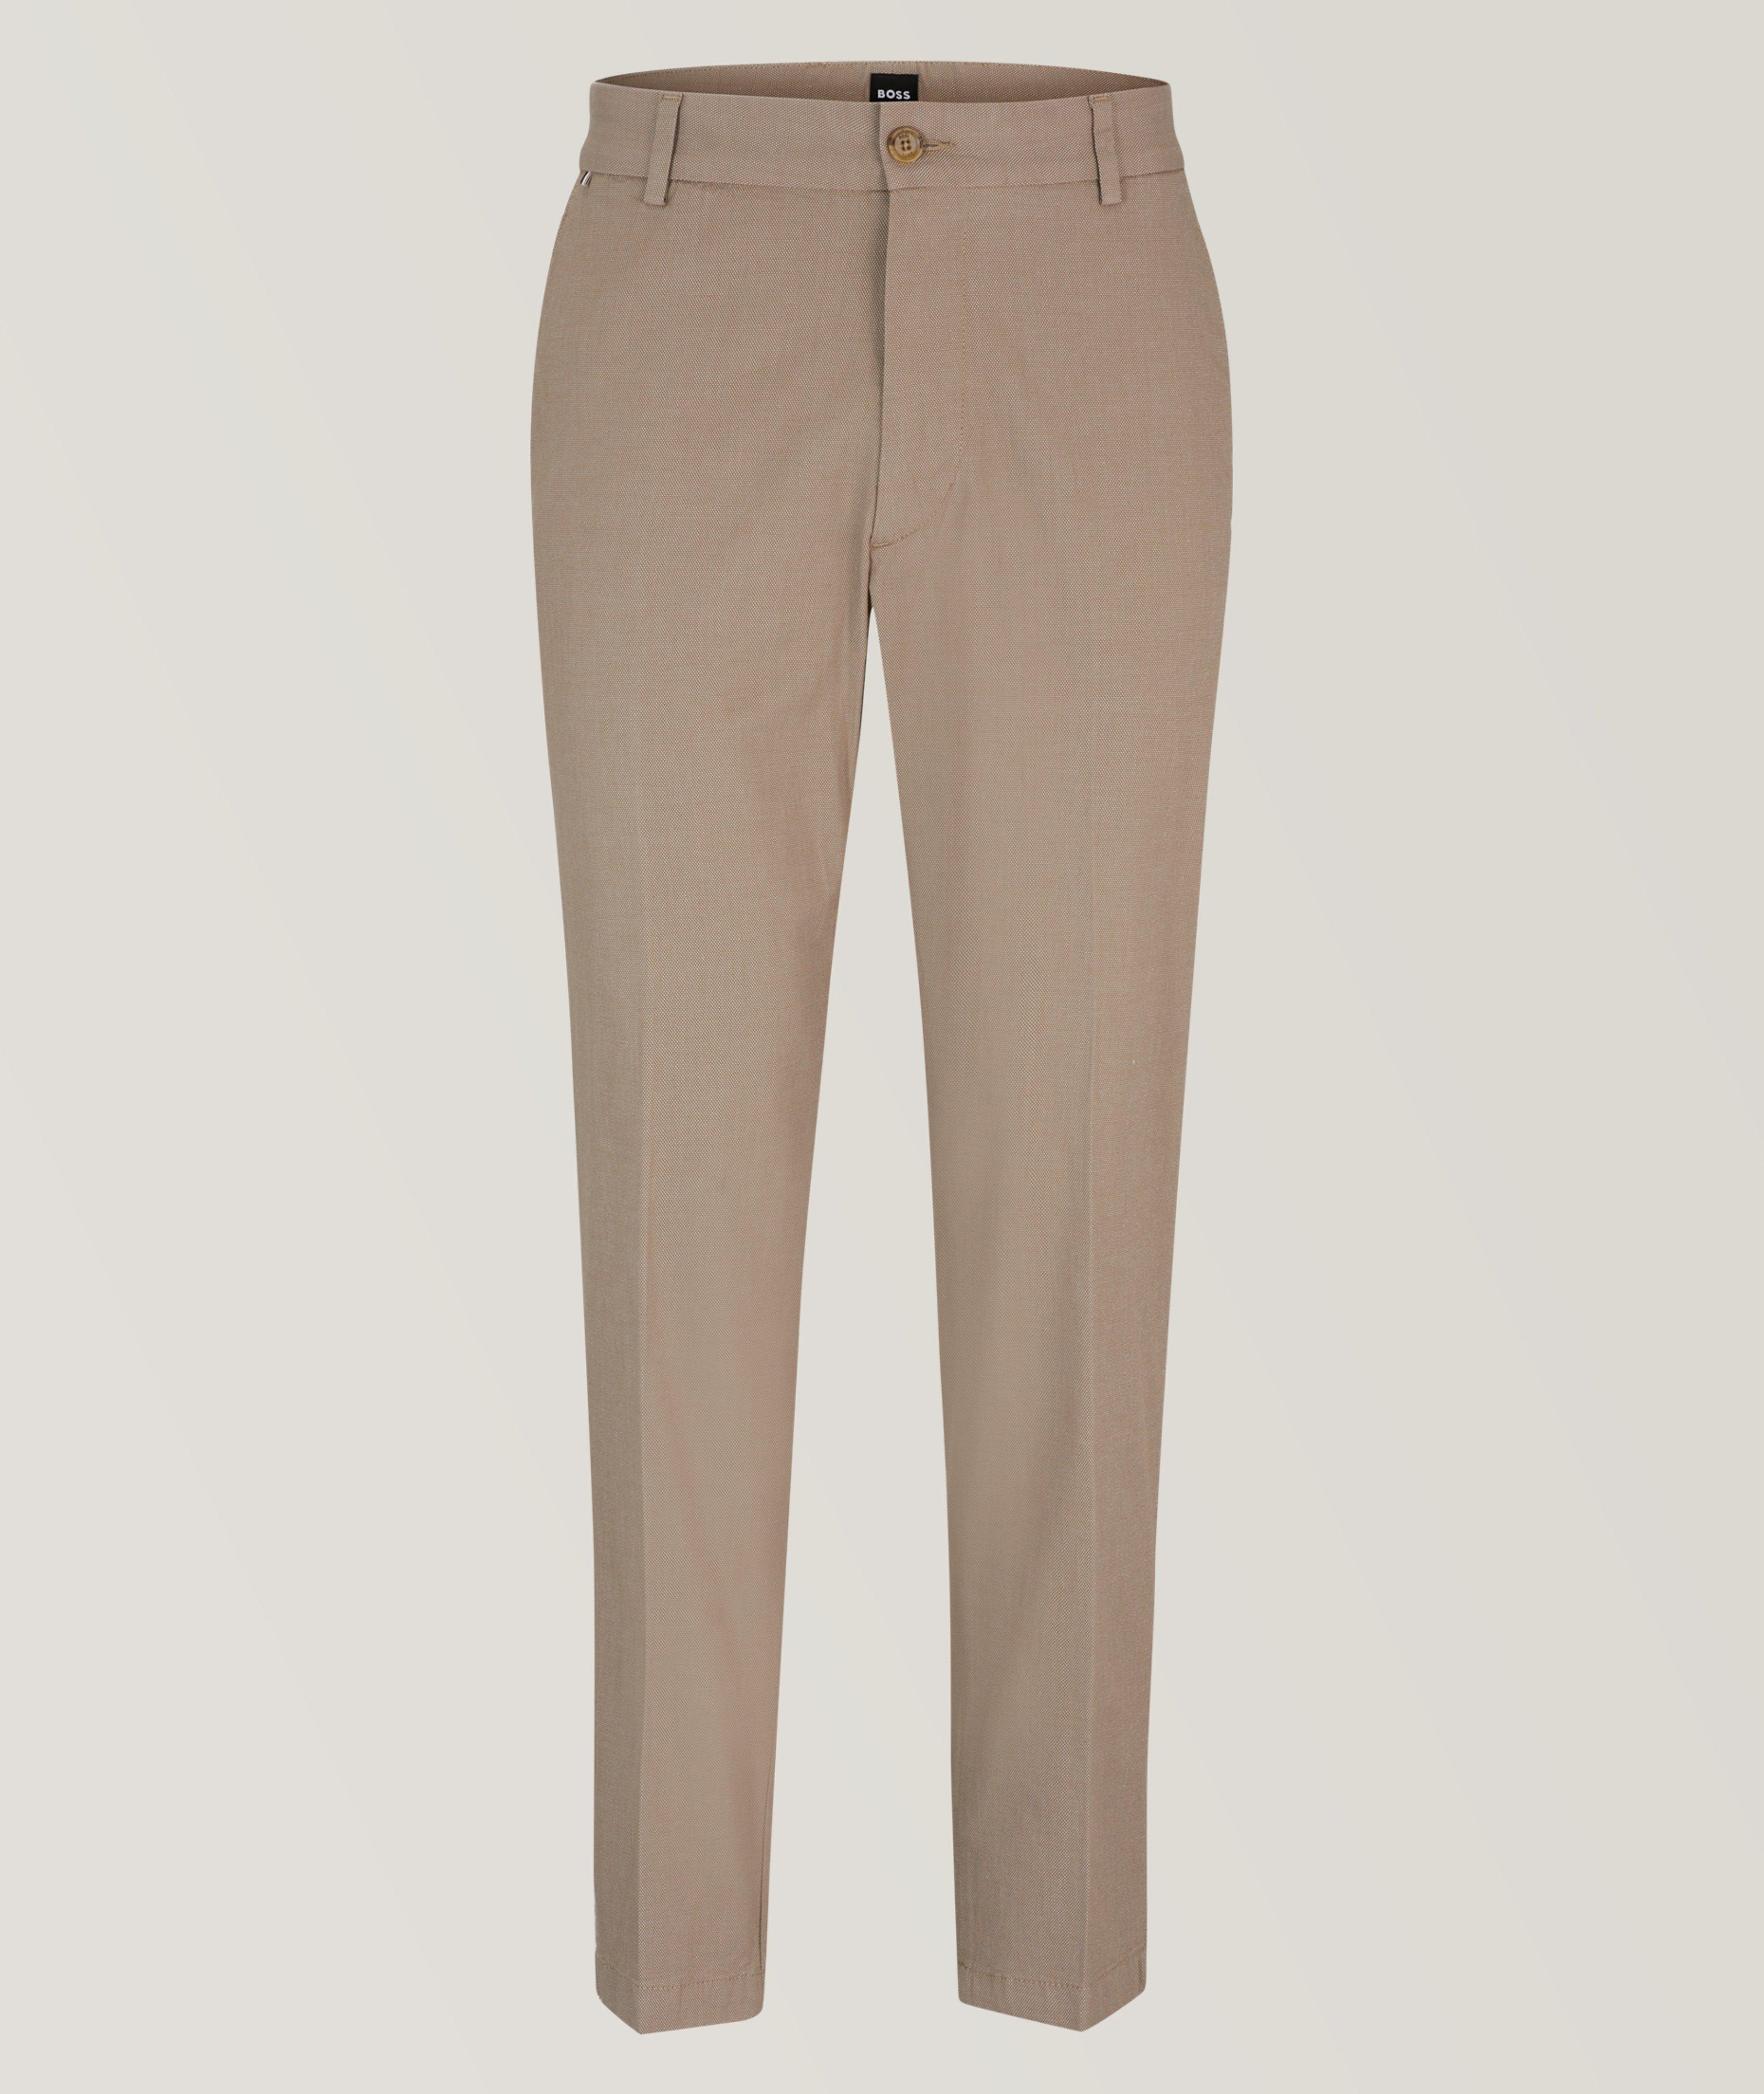 Kane Micro-Patterned Stretch-Cotton Trousers image 0